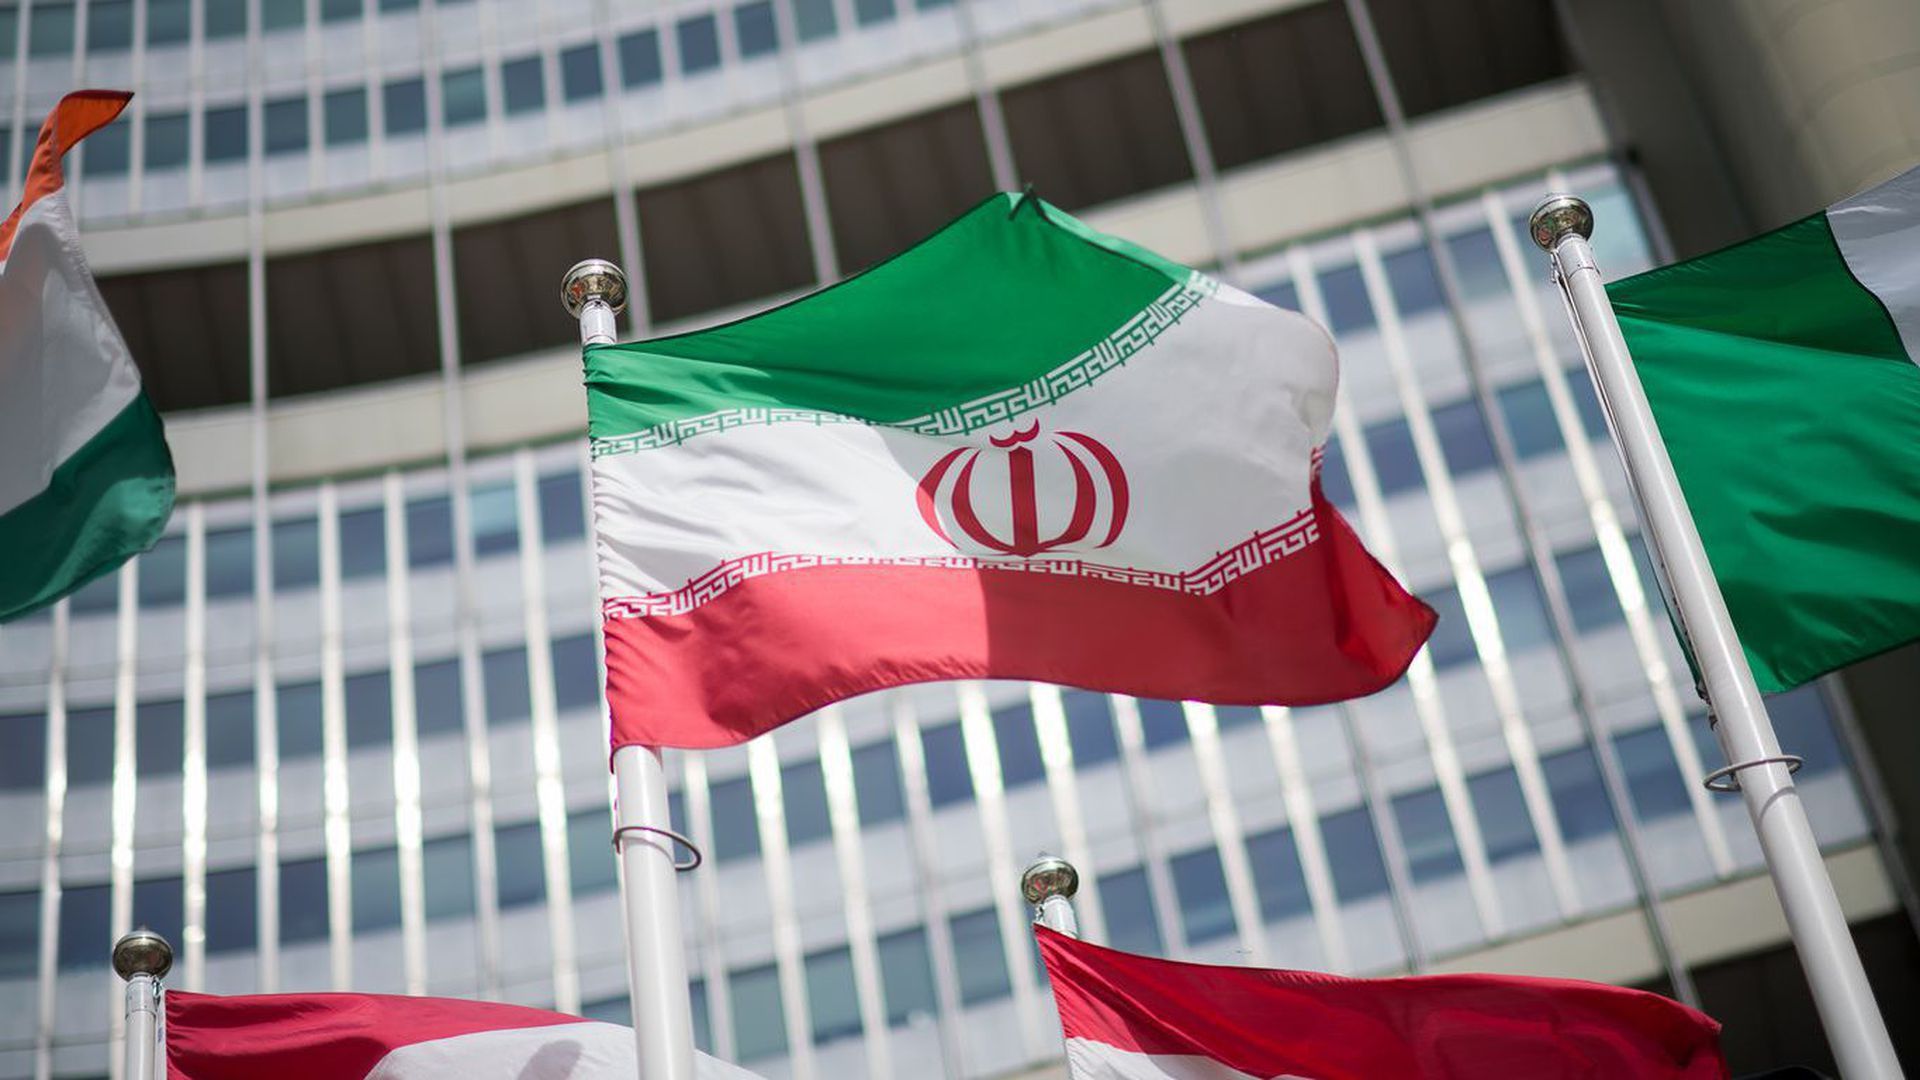 The flag of Iran in front of the International Atomic Energy Agency headquarters. Photo: Michael Gruber/Getty Images